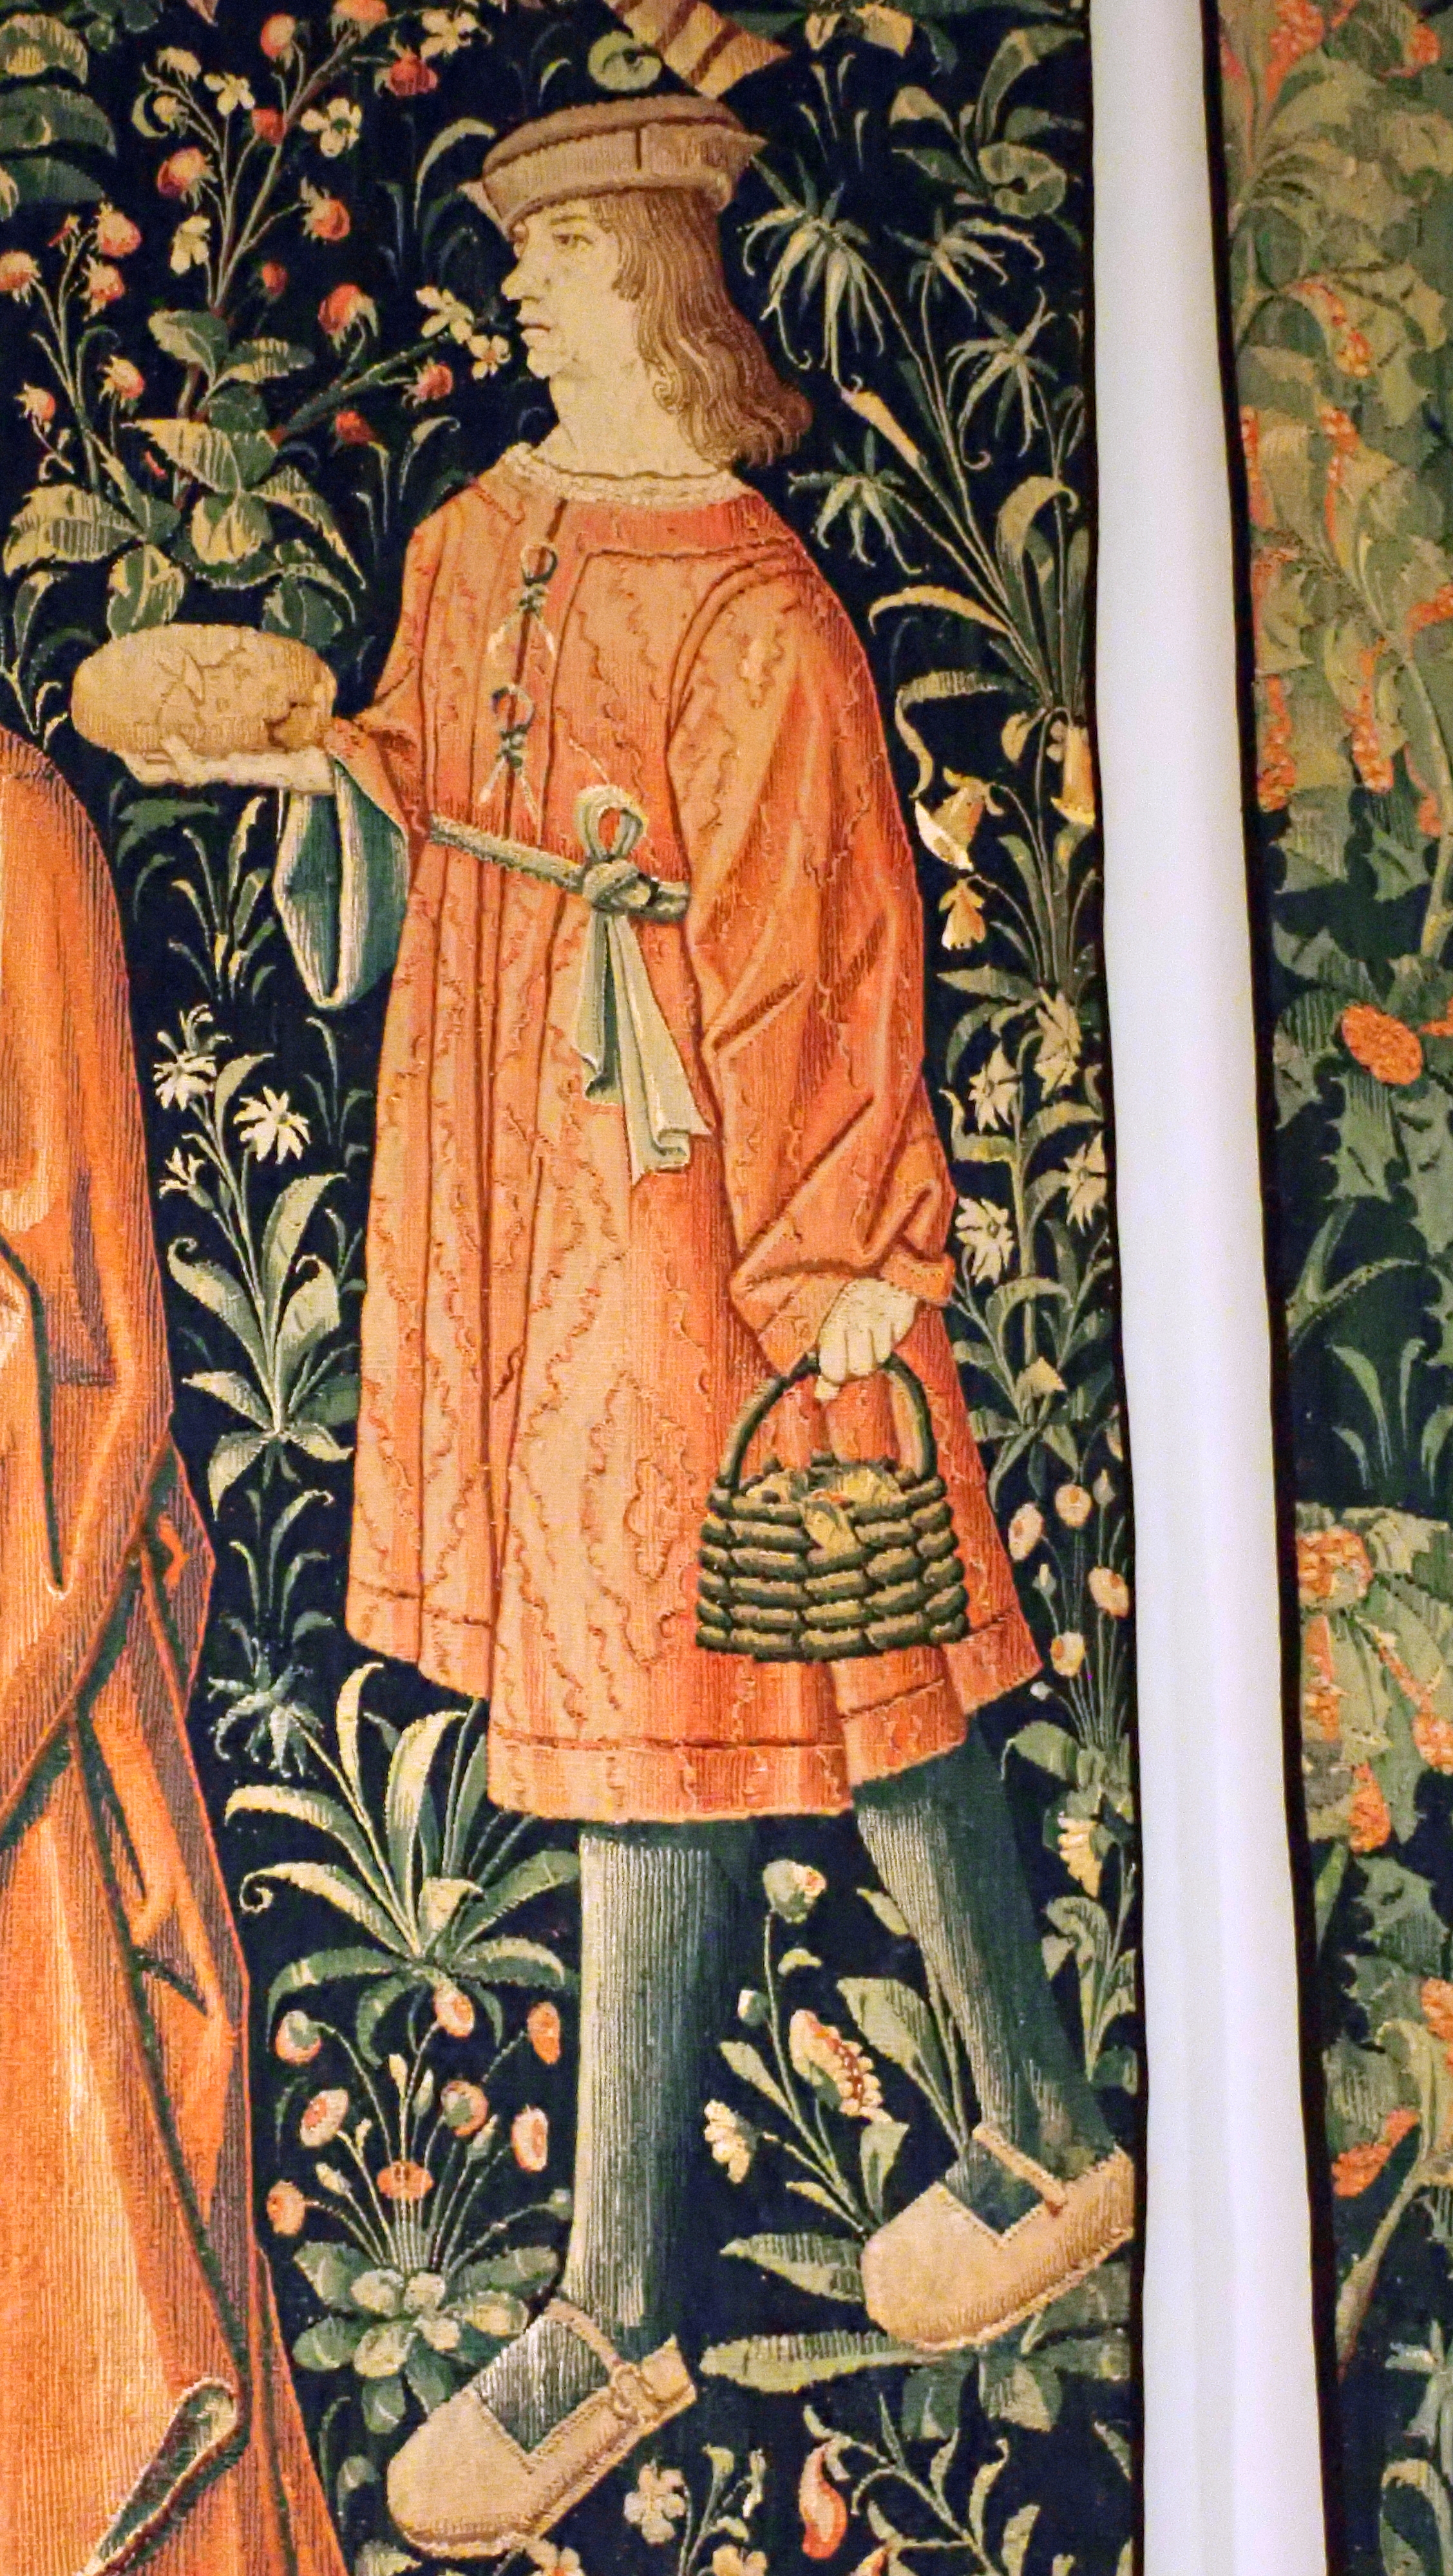 1500 (approx) - Cluny museum - Tapestry from the Seigneurial life series - The Bath